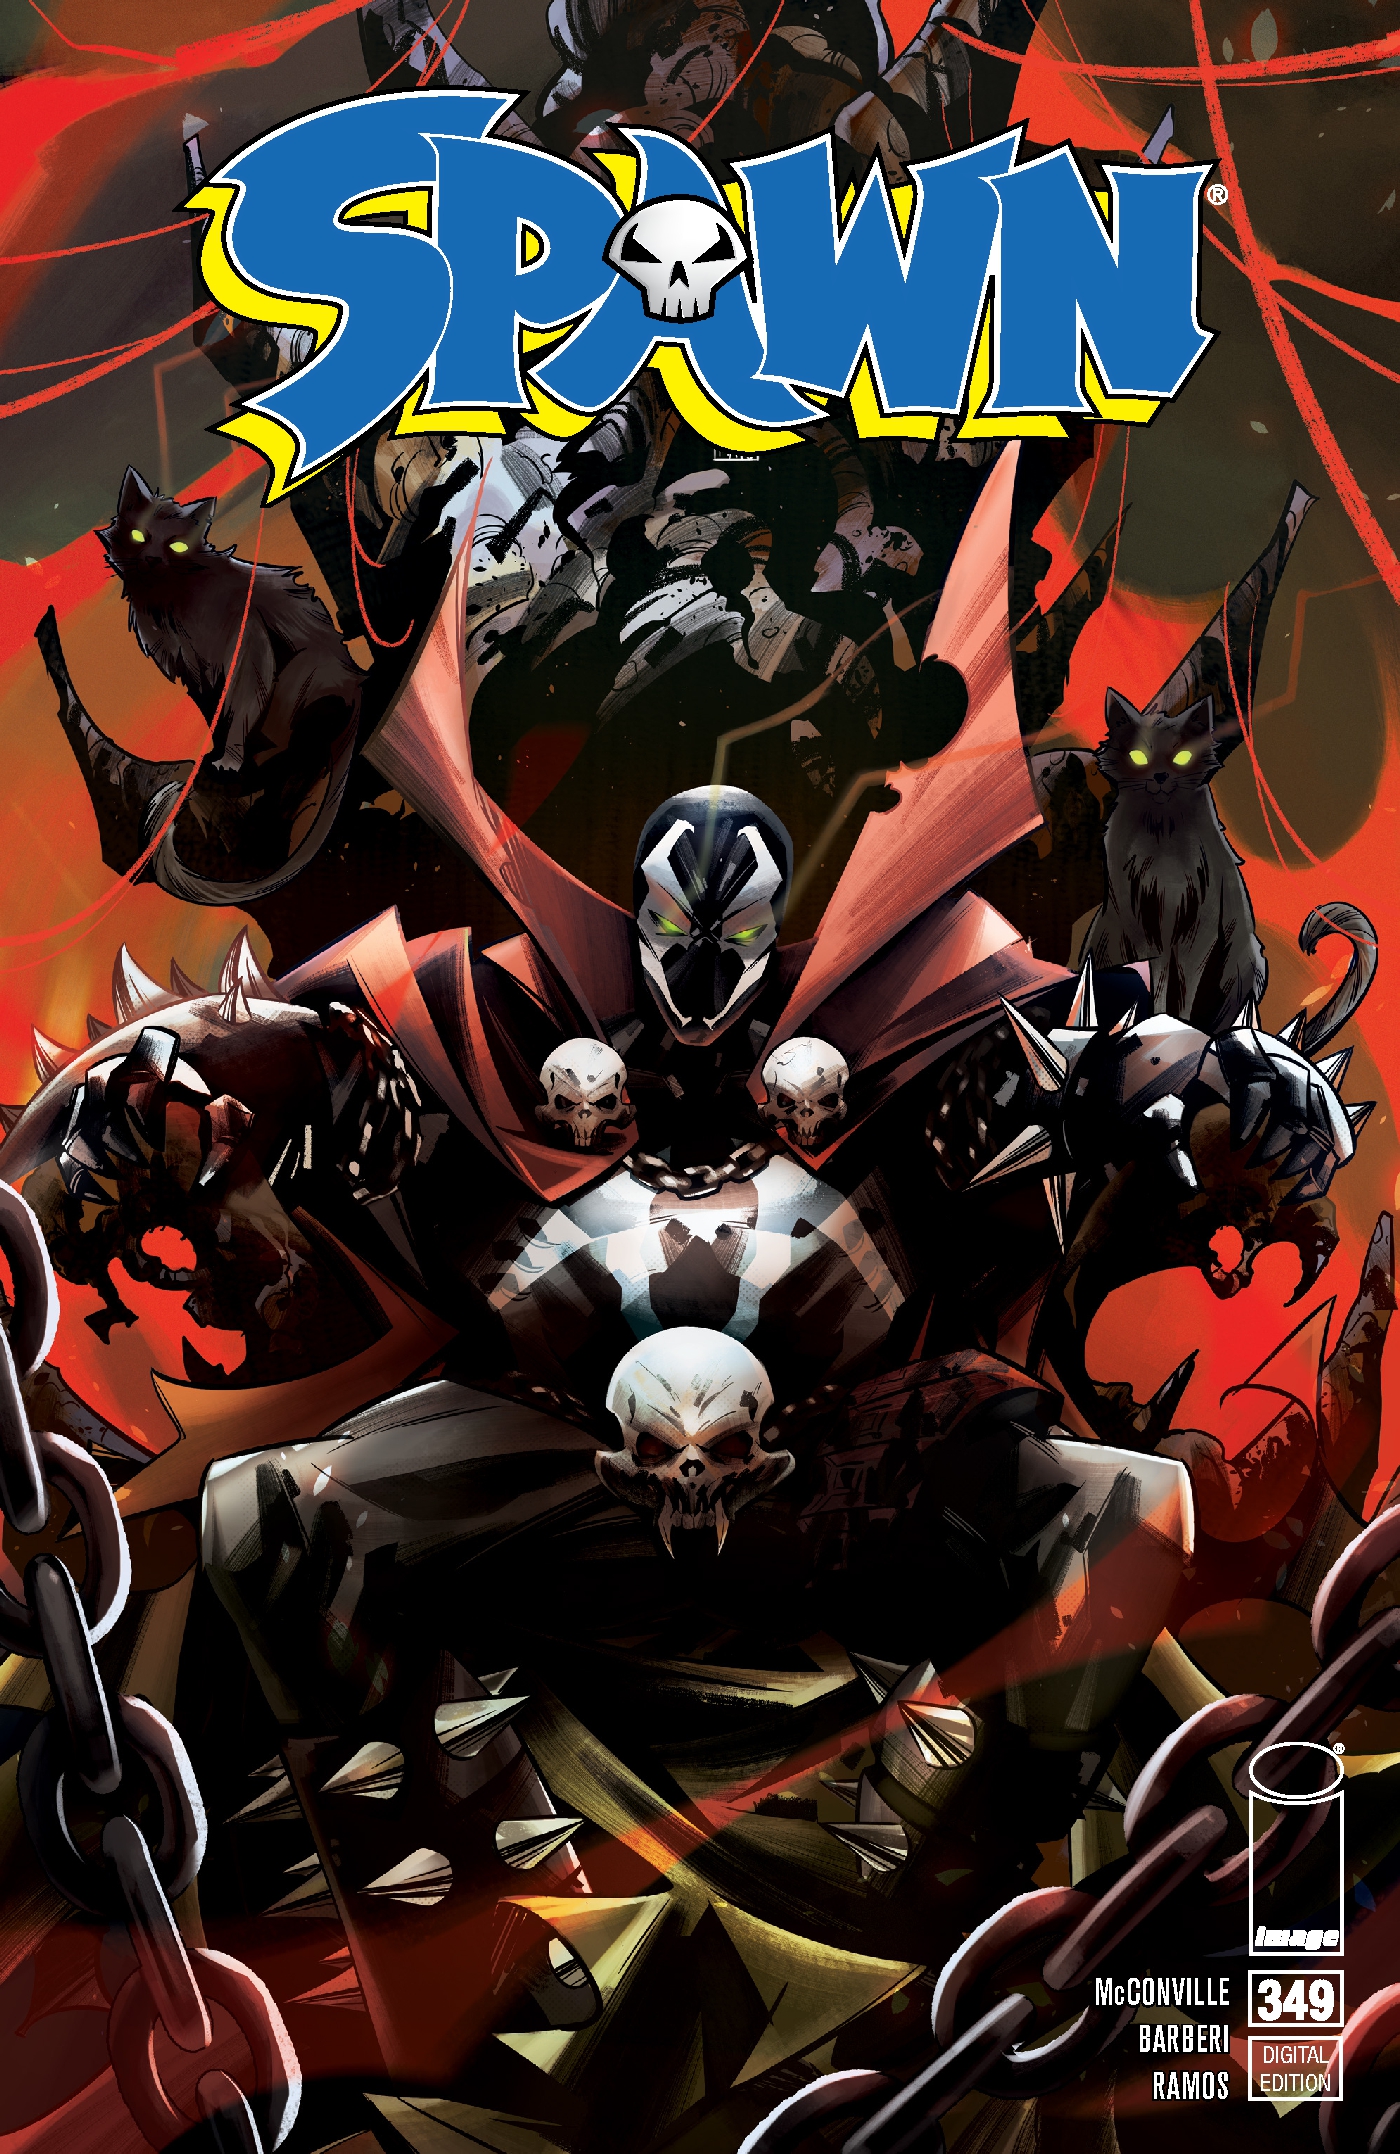 This image is the cover for the book Spawn #349, Spawn